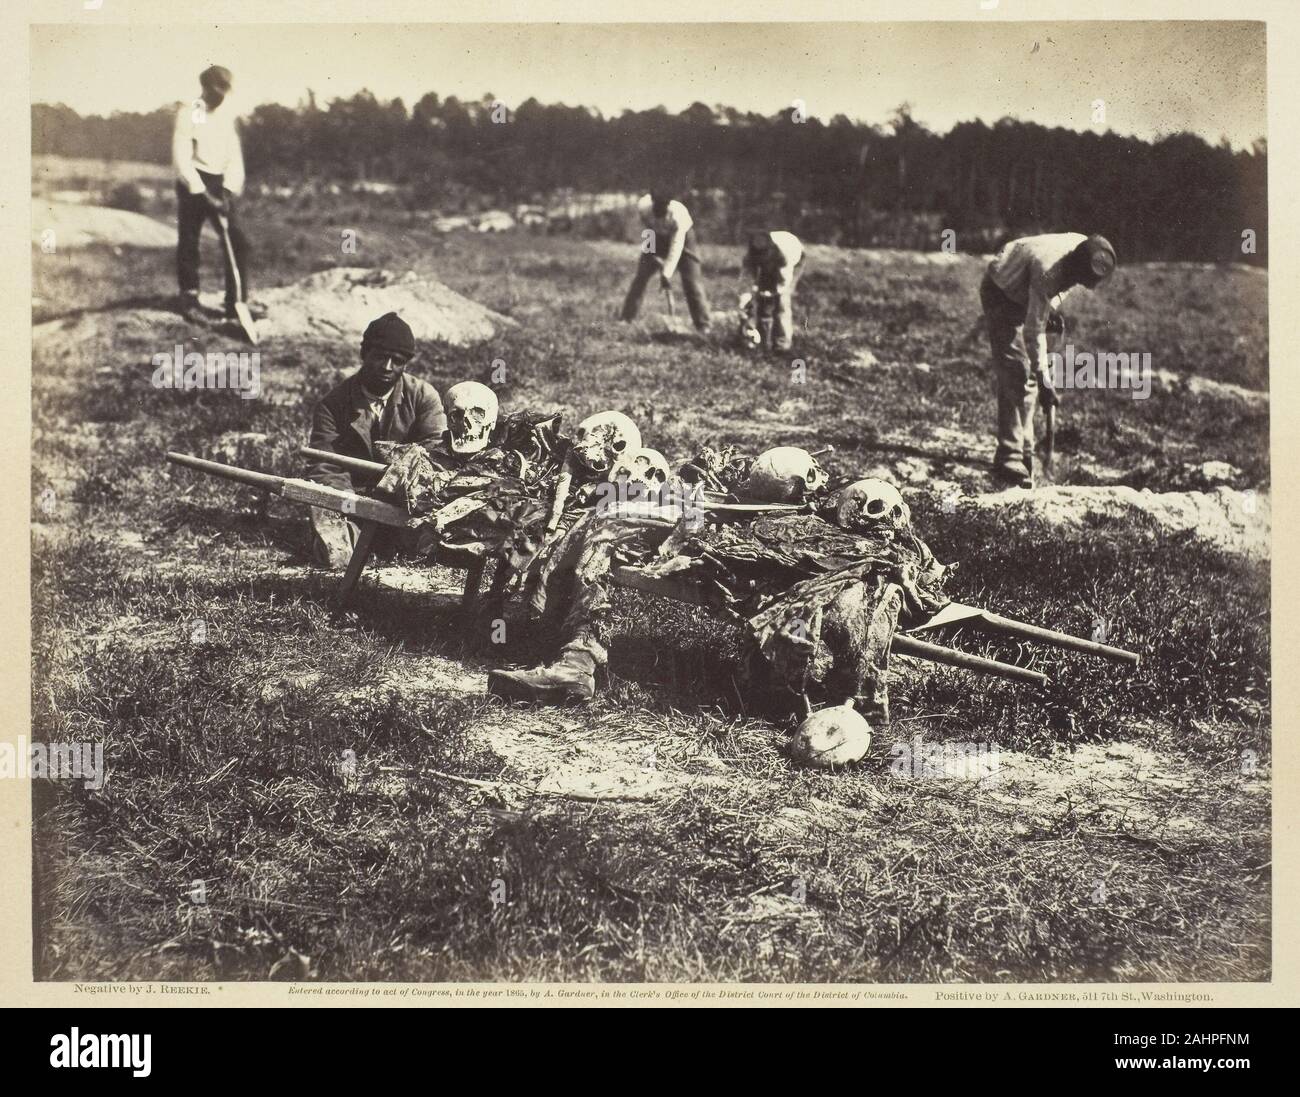 John Reekie. A Burial Party, Cold Harbor, Virginia. 1865. United States. Albumen print, pl. 94 from the album Gardner's Photographic Sketch Book of the War, Volume II (1866) Stock Photo